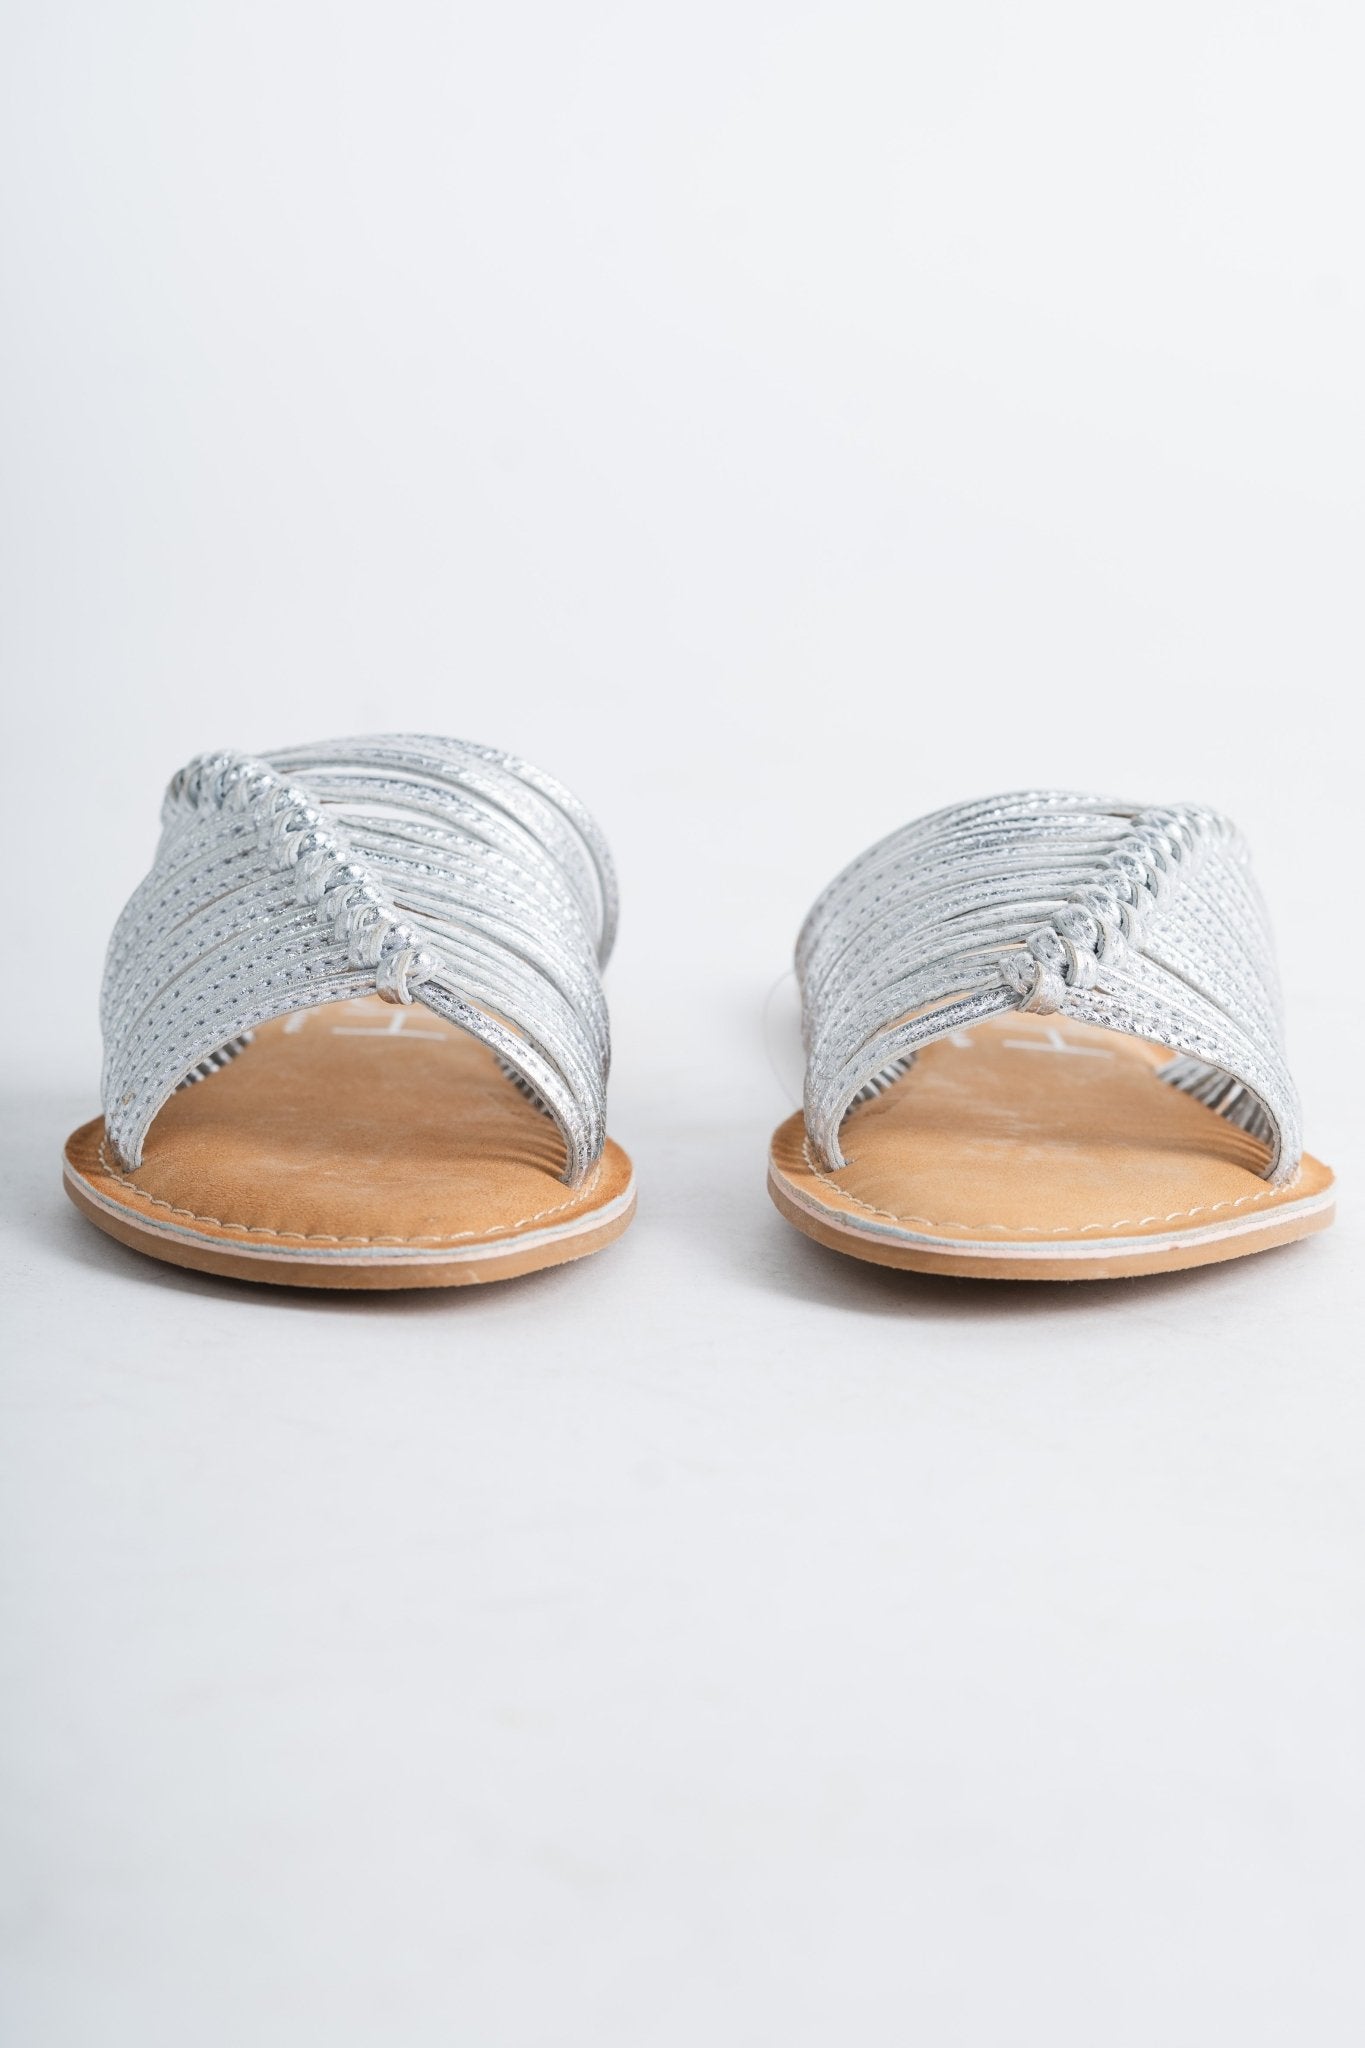 Baxter leather sandals silver - Trendy shoes - Fashion Shoes at Lush Fashion Lounge Boutique in Oklahoma City